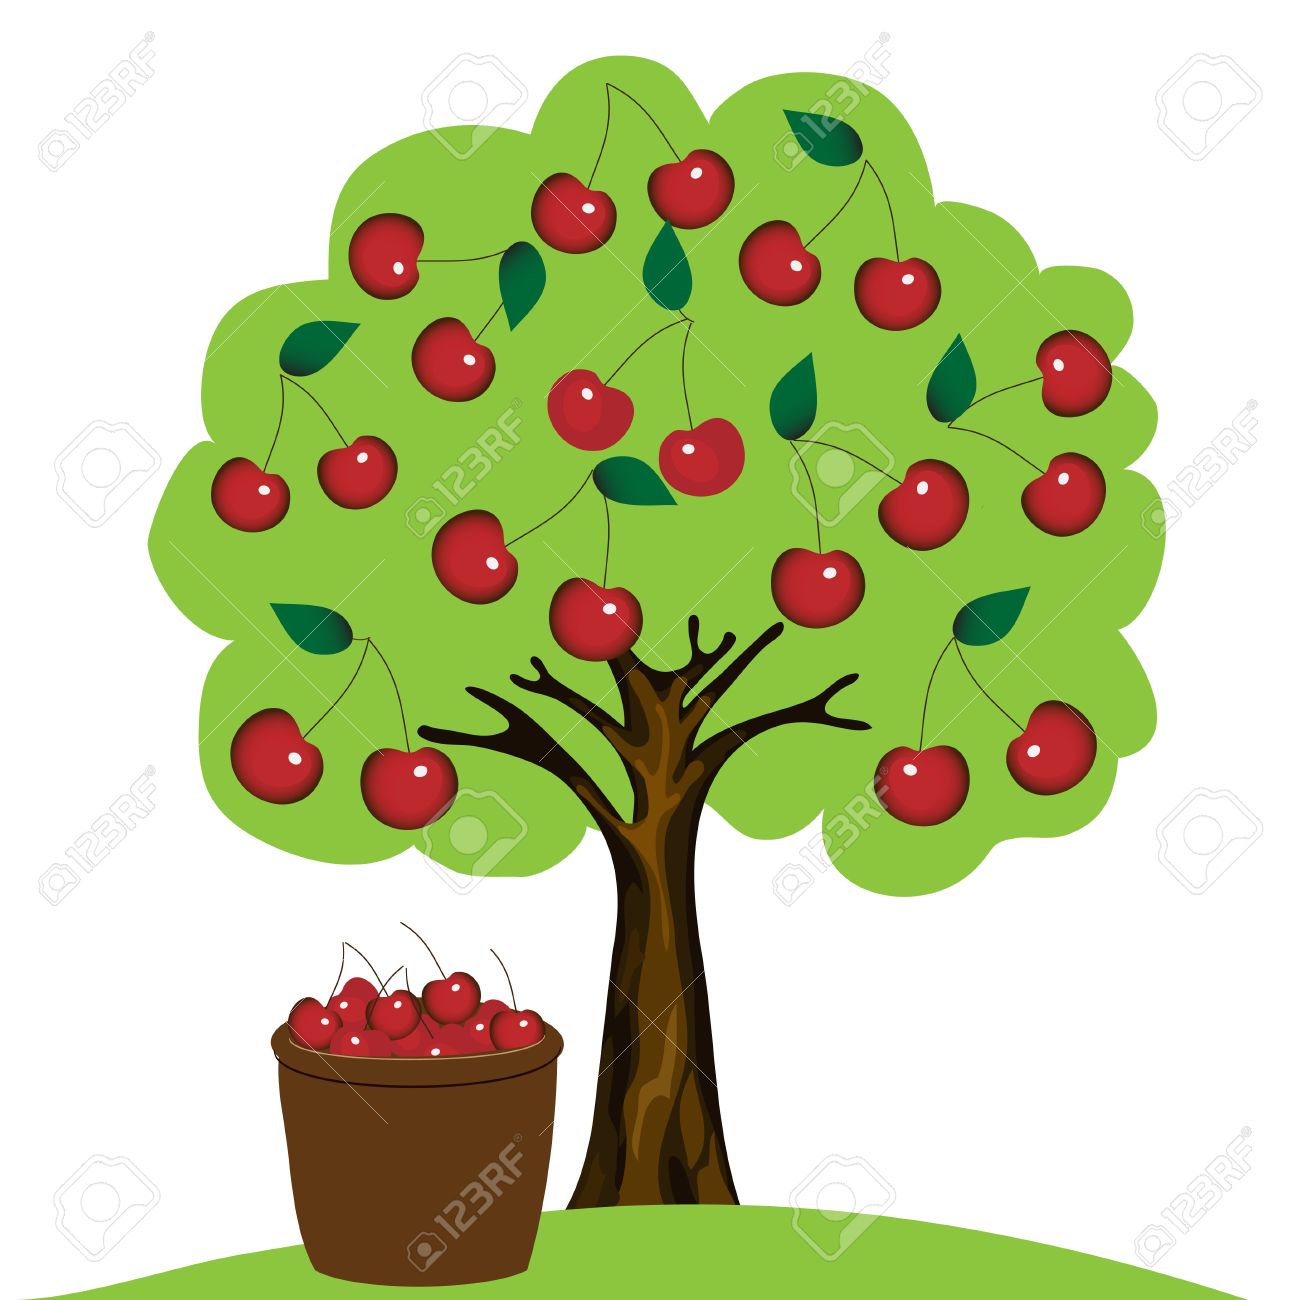 free clipart images apple tree - photo #44